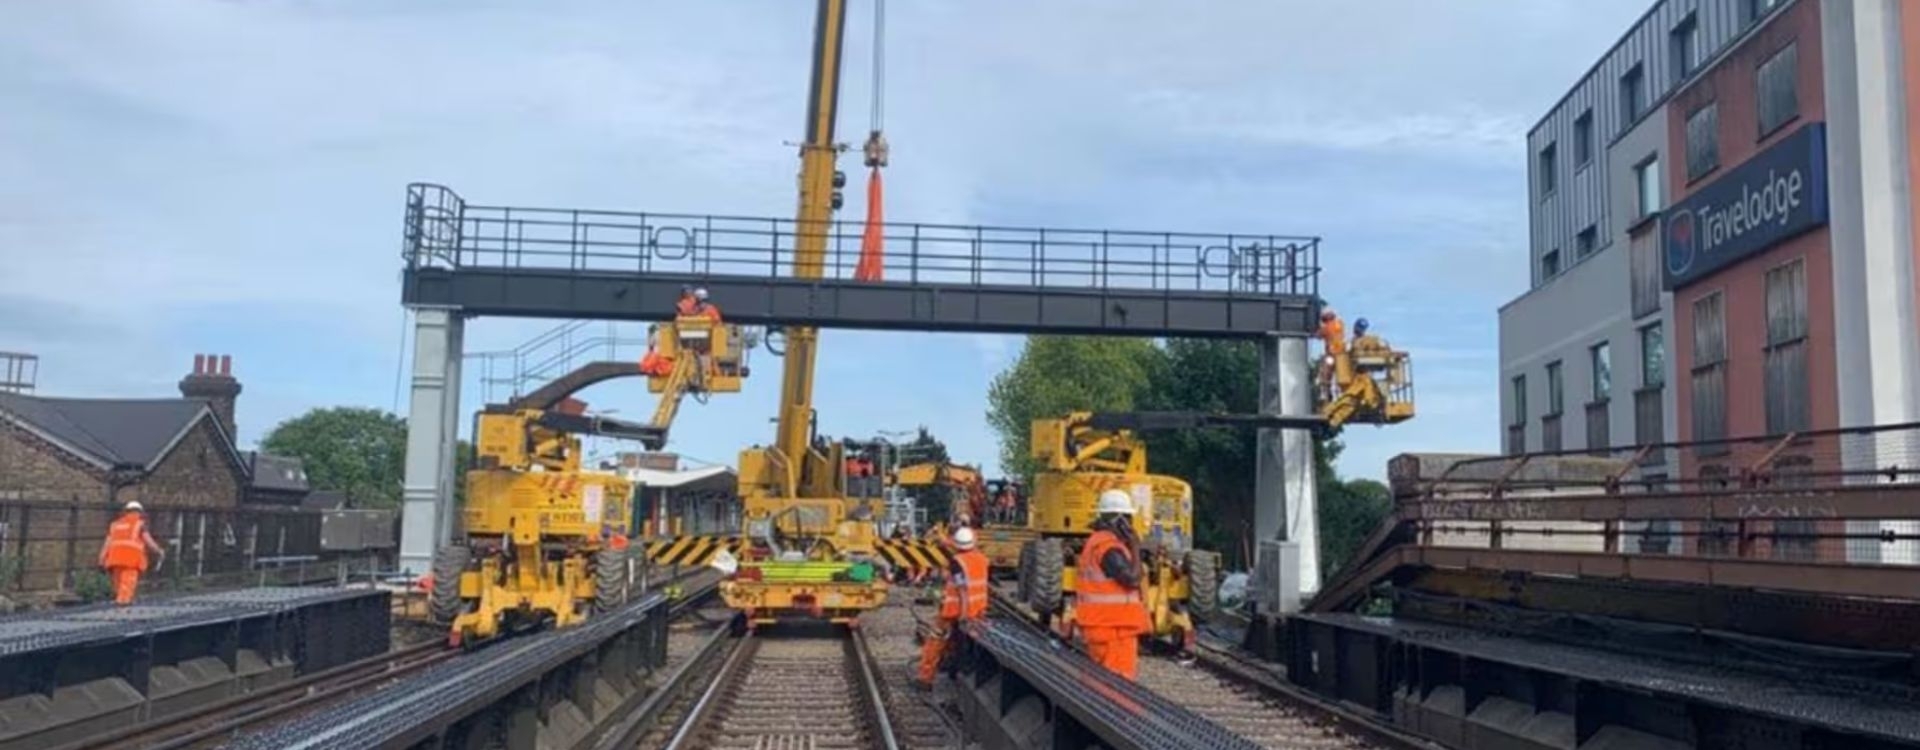 Signalling upgrades to impact services in South London during February half term